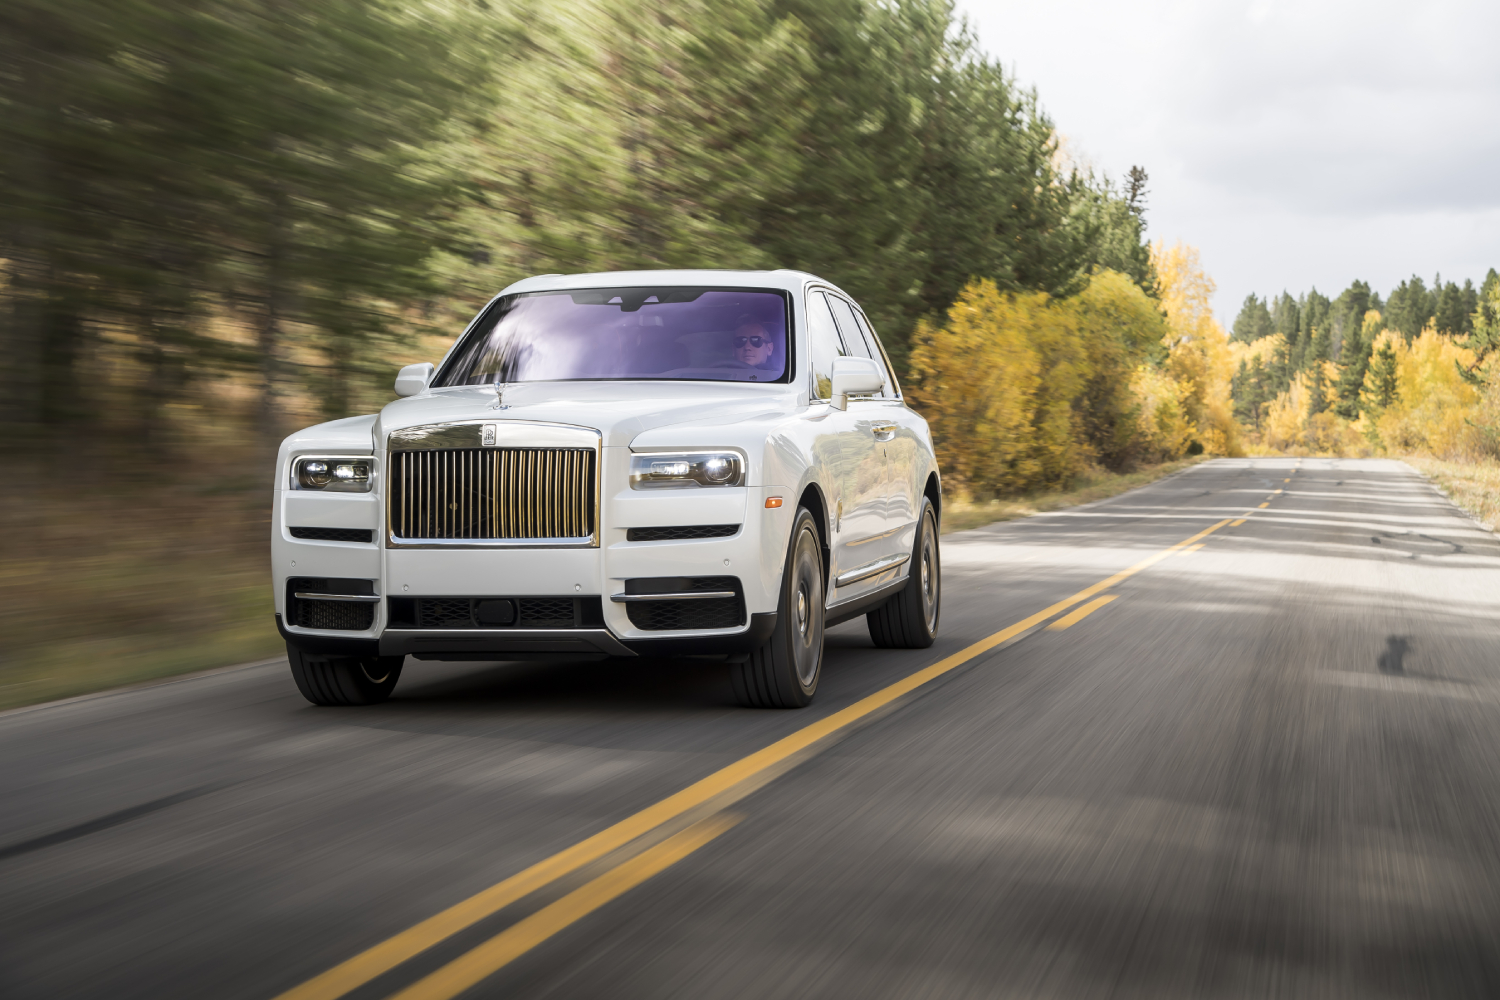 How much does a Rolls-Royce Cullinan luxury SUV cost?